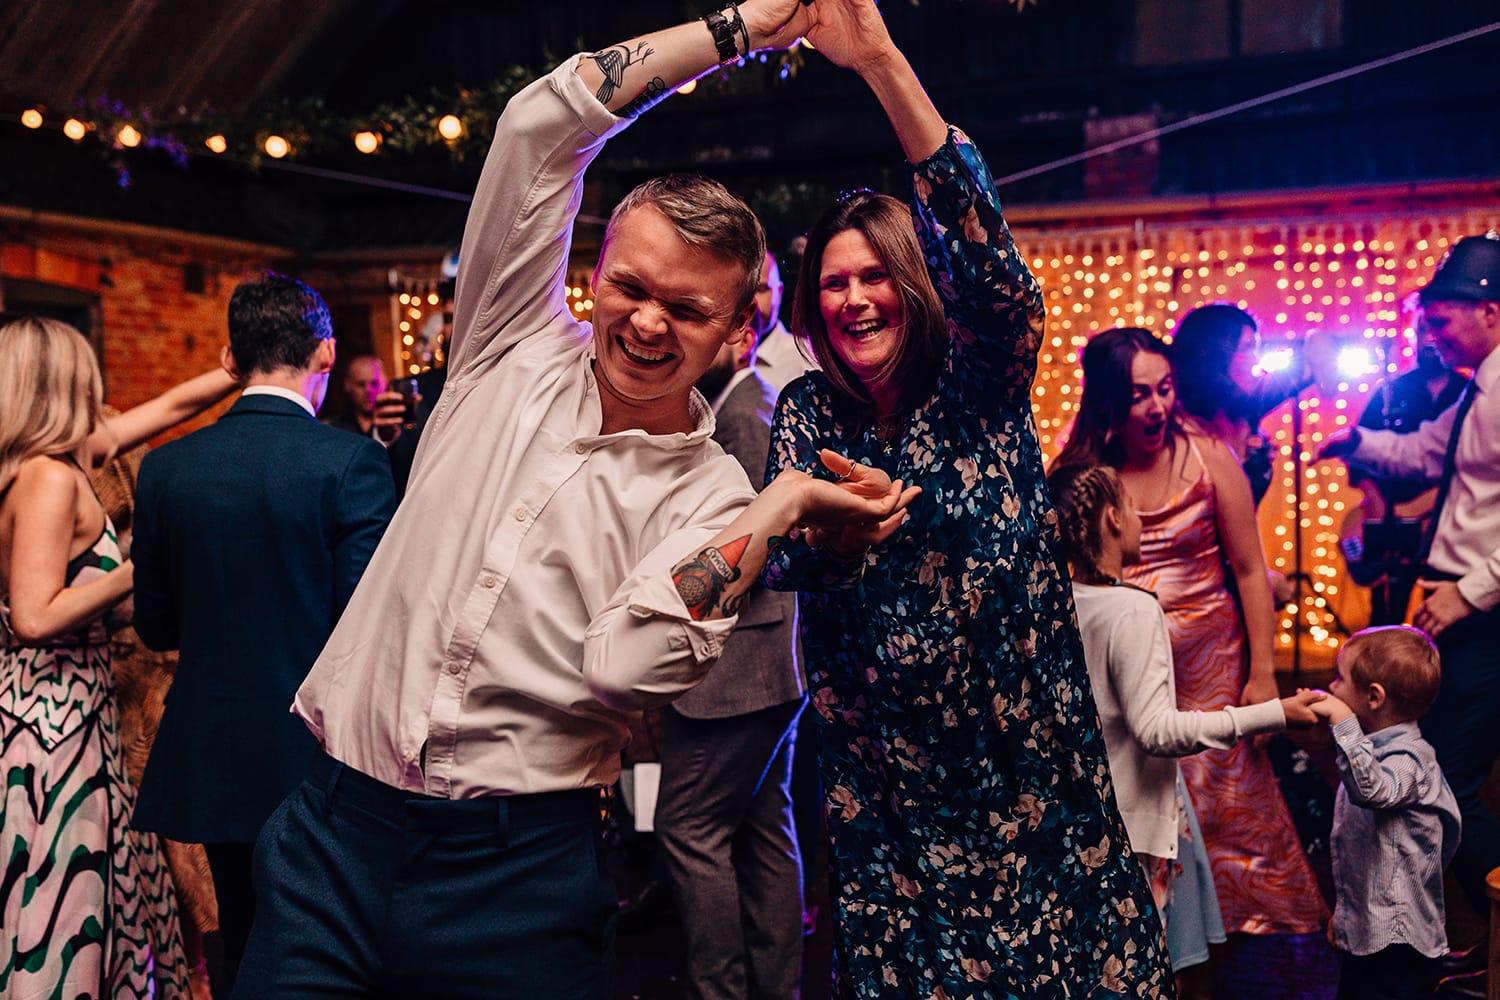 Fun photograph of wedding guests on the dance-floor spinning around